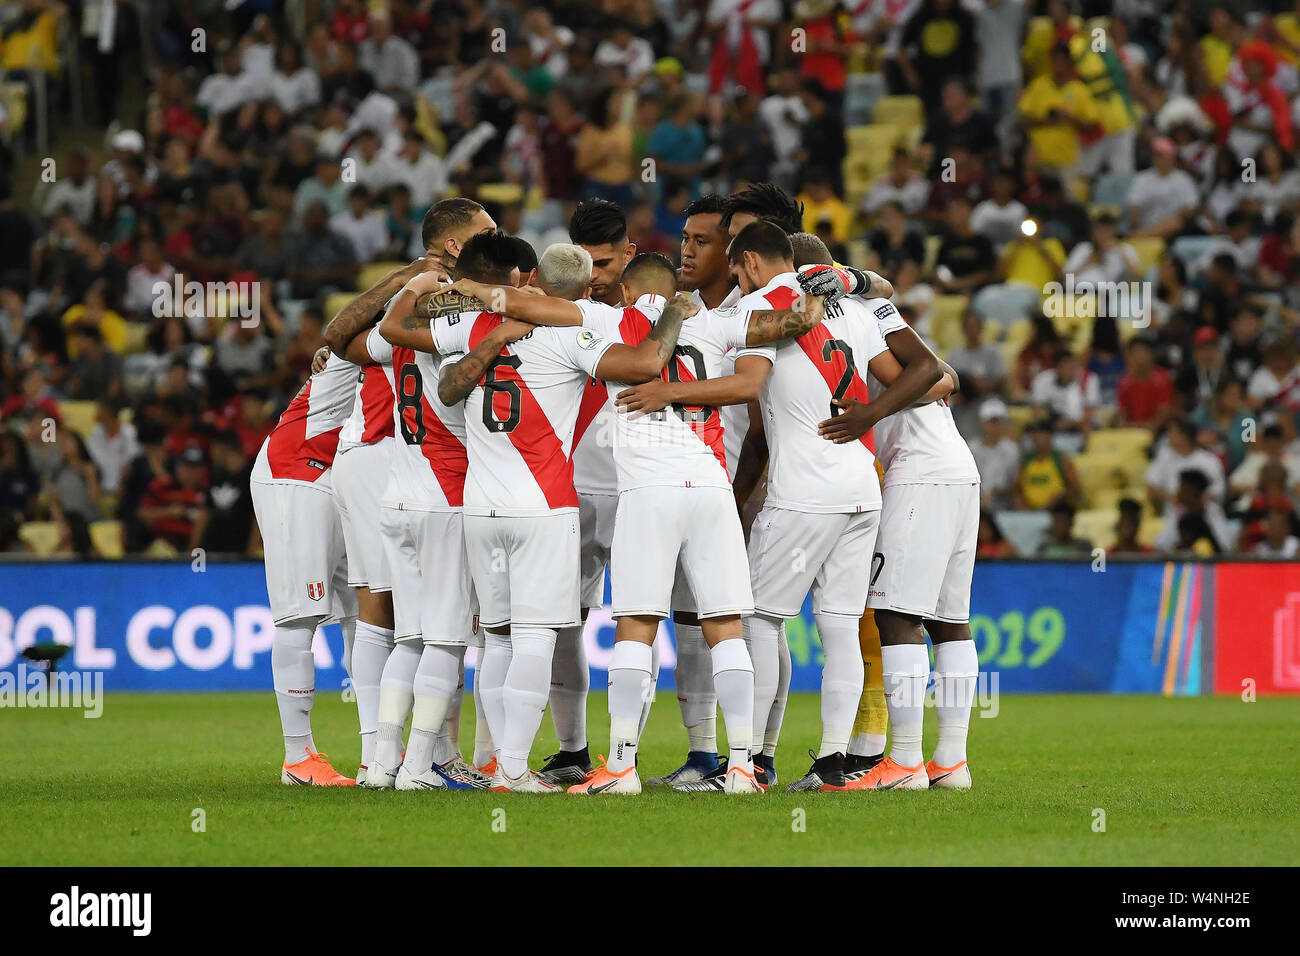 Rio de Janeiro, Brazil, June 18, 2019. Soccer players from the Peruvian team during the match between Bolivia and Peru for the Copa America 2019 at th Stock Photo